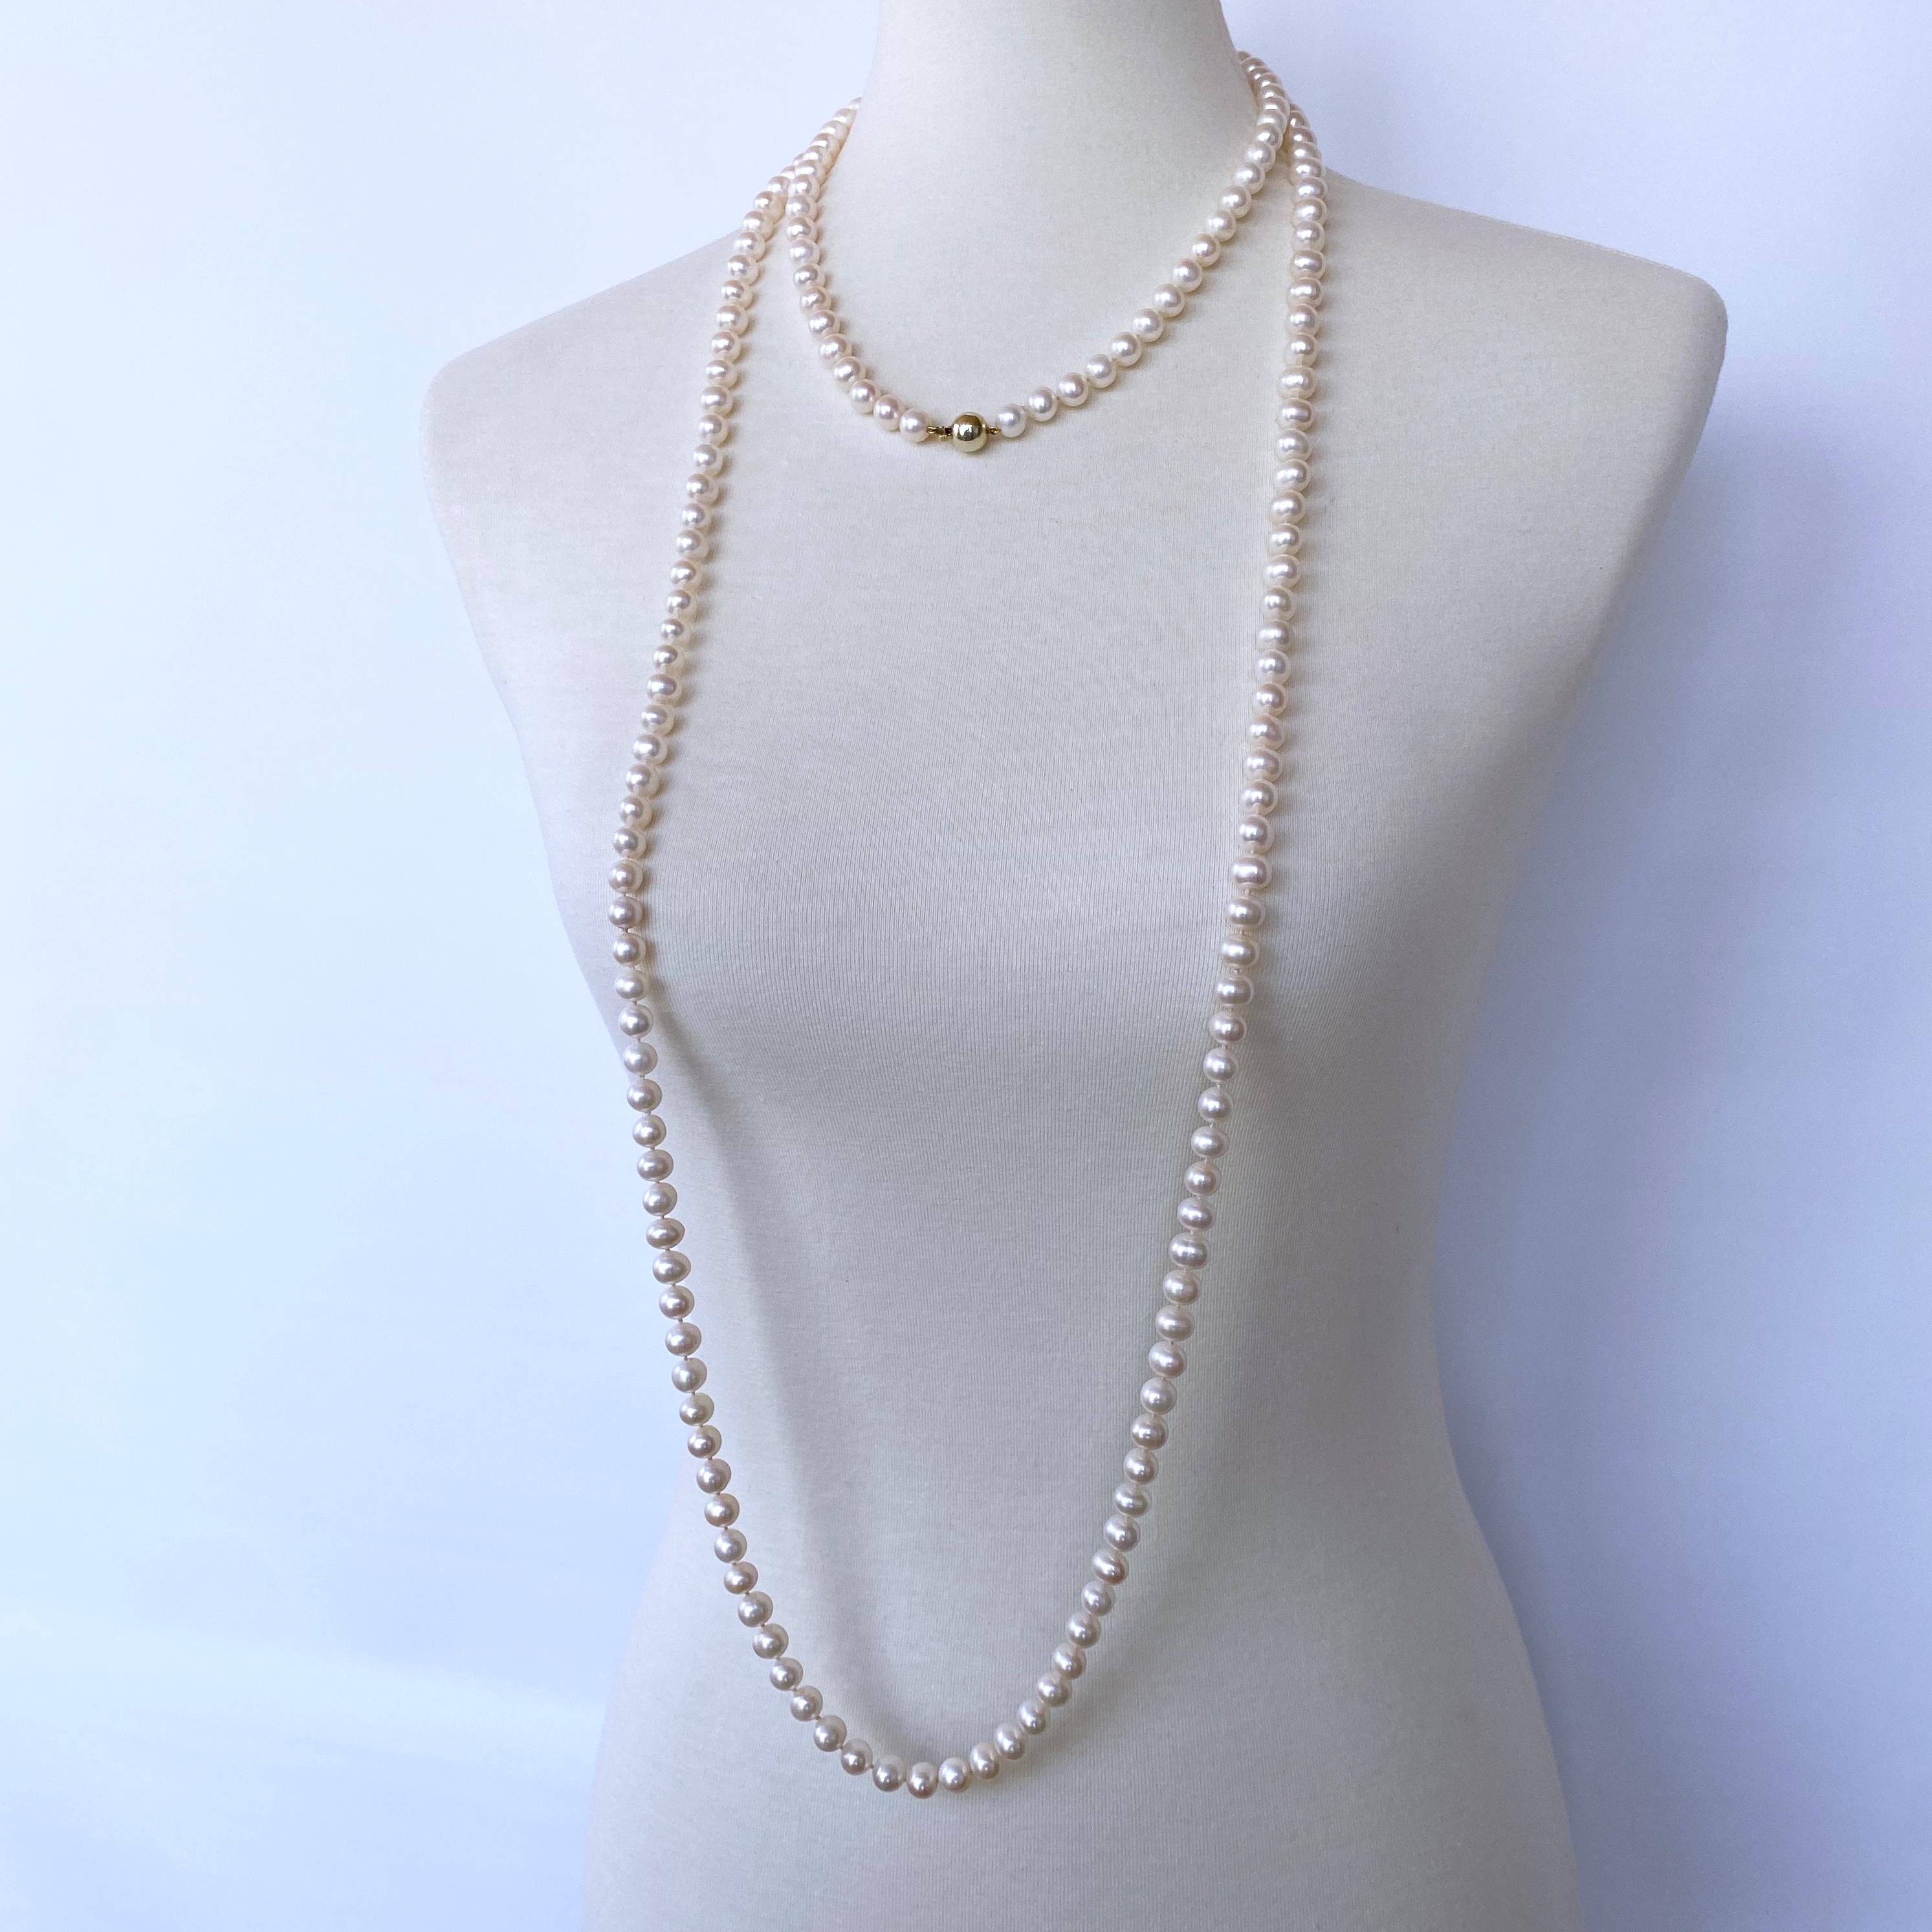 Marina J. Long Pearl Knotted Necklace with 14k Yellow Gold Ball Clasp 1